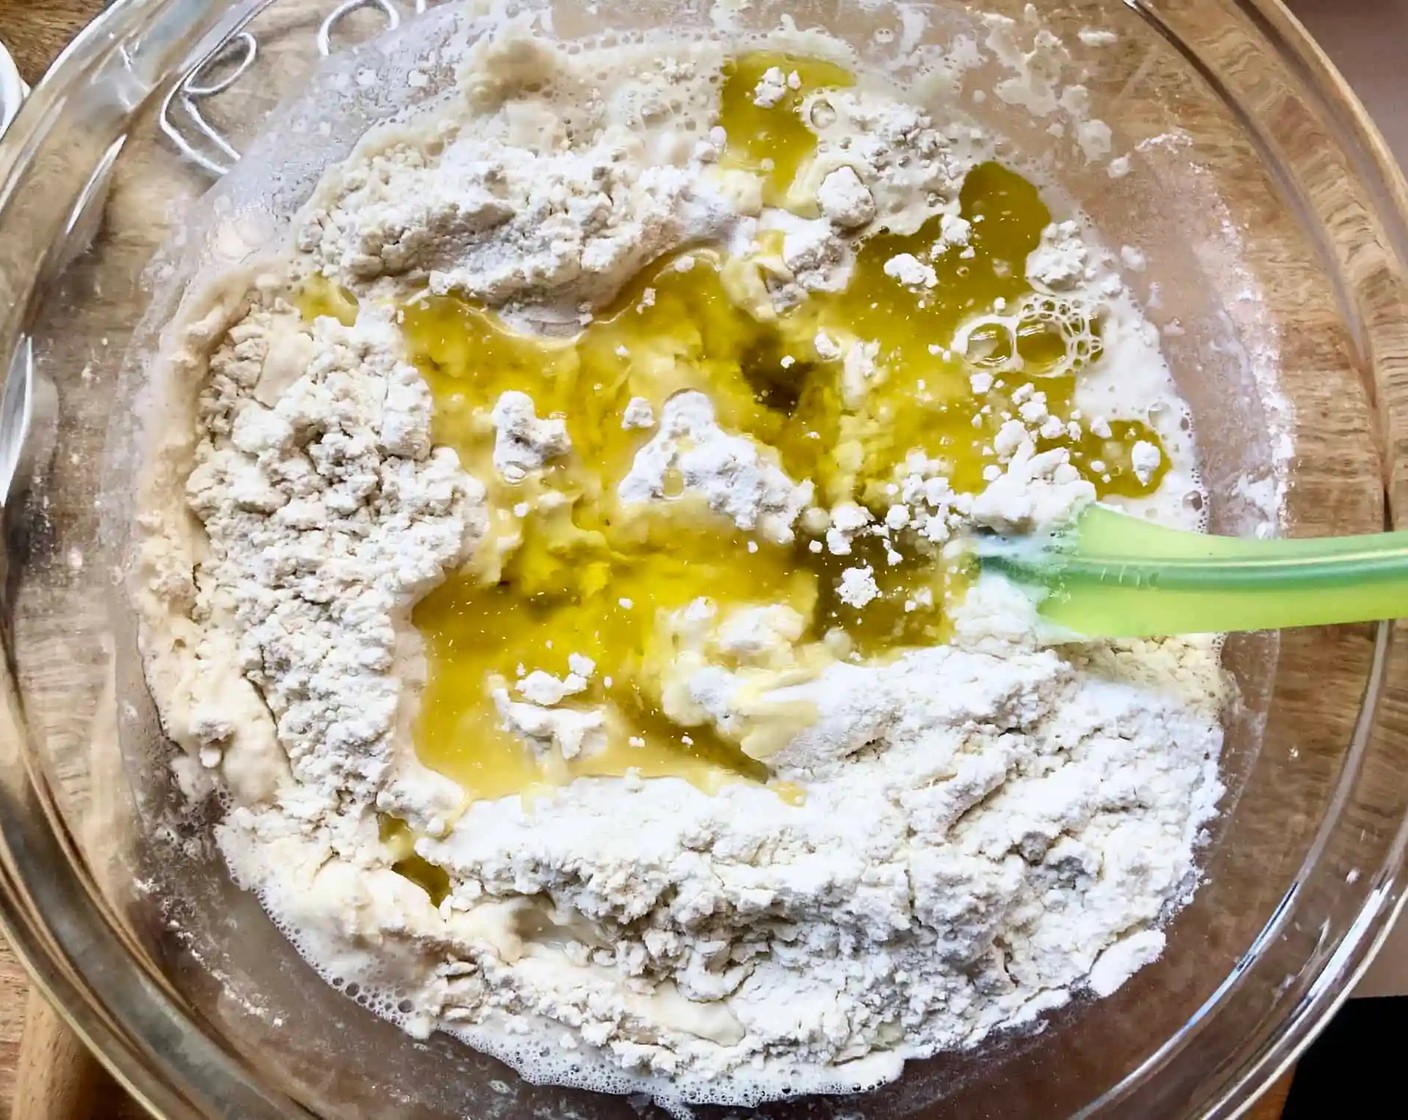 step 1 In a large bowl, whisk together the Unbleached All Purpose Flour (6 cups), Kosher Salt (1 Tbsp), Granulated Sugar (1 Tbsp), and Instant Dry Yeast (1 Tbsp). Add the Water (3 cups), followed by the Neutral Oil (1/3 cup). Using a rubber spatula, mix until the liquid is absorbed and the ingredients form a sticky dough ball.